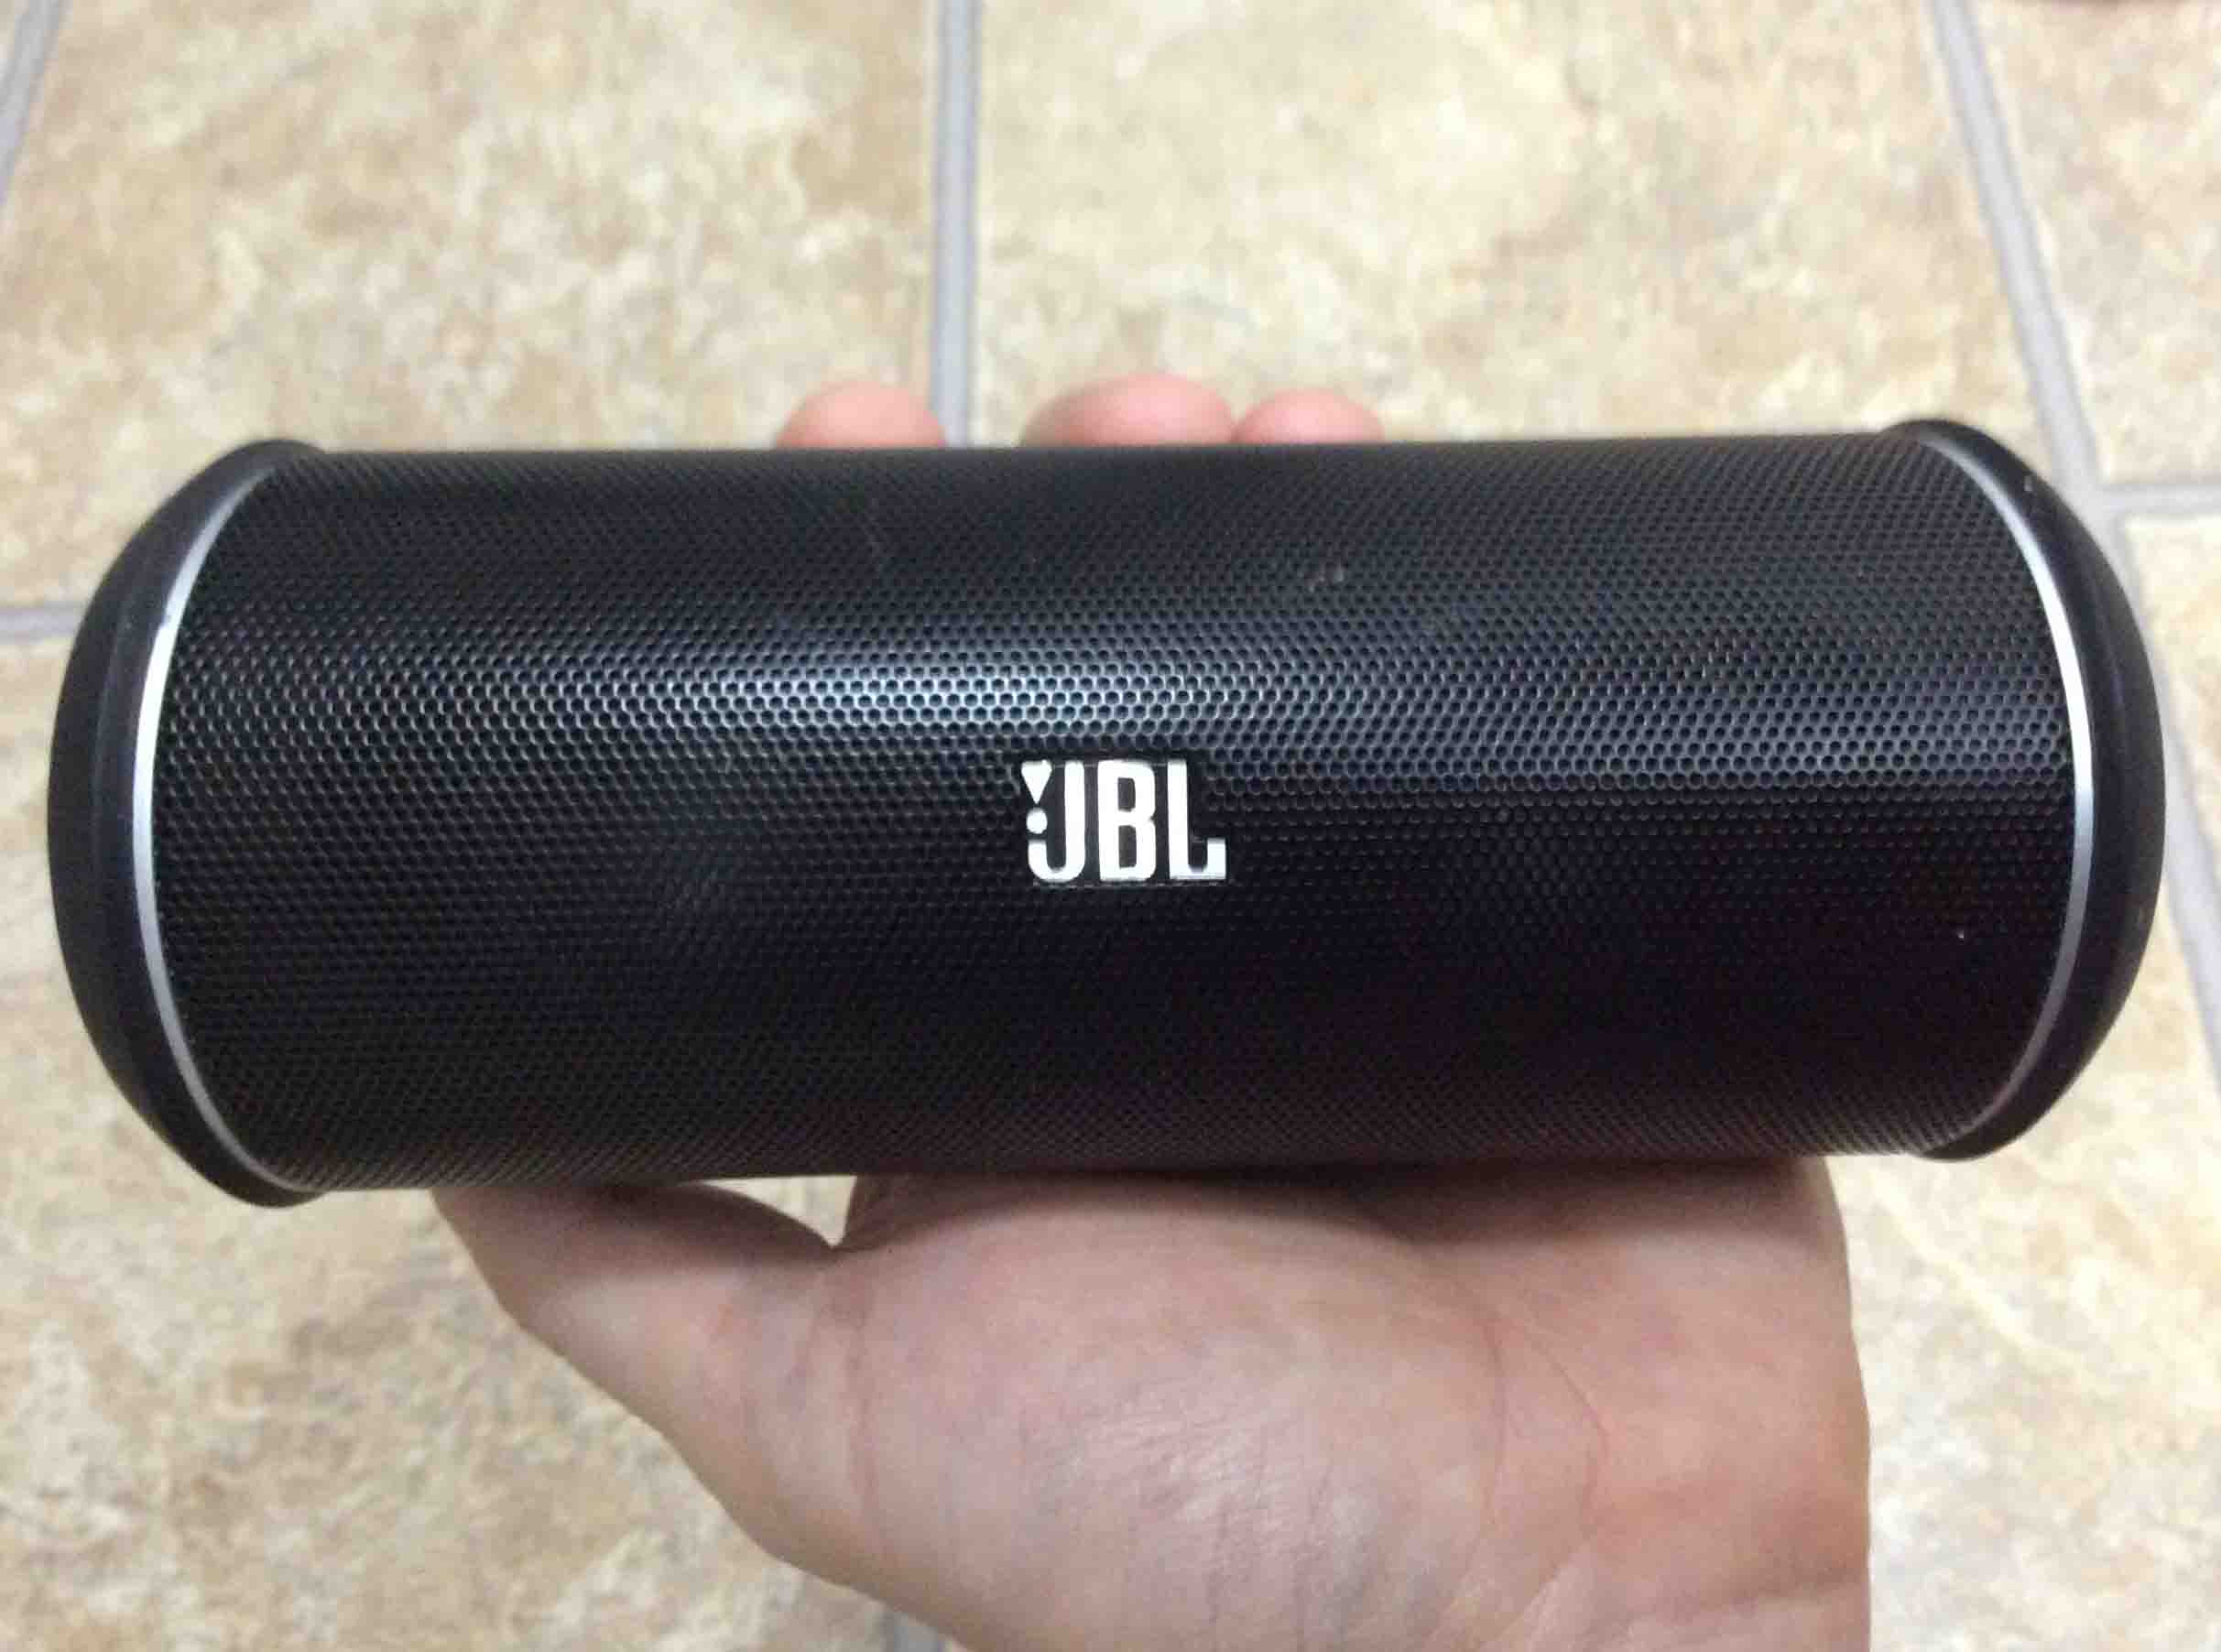 How to Put JBL 2 in Pairing Mode Stop